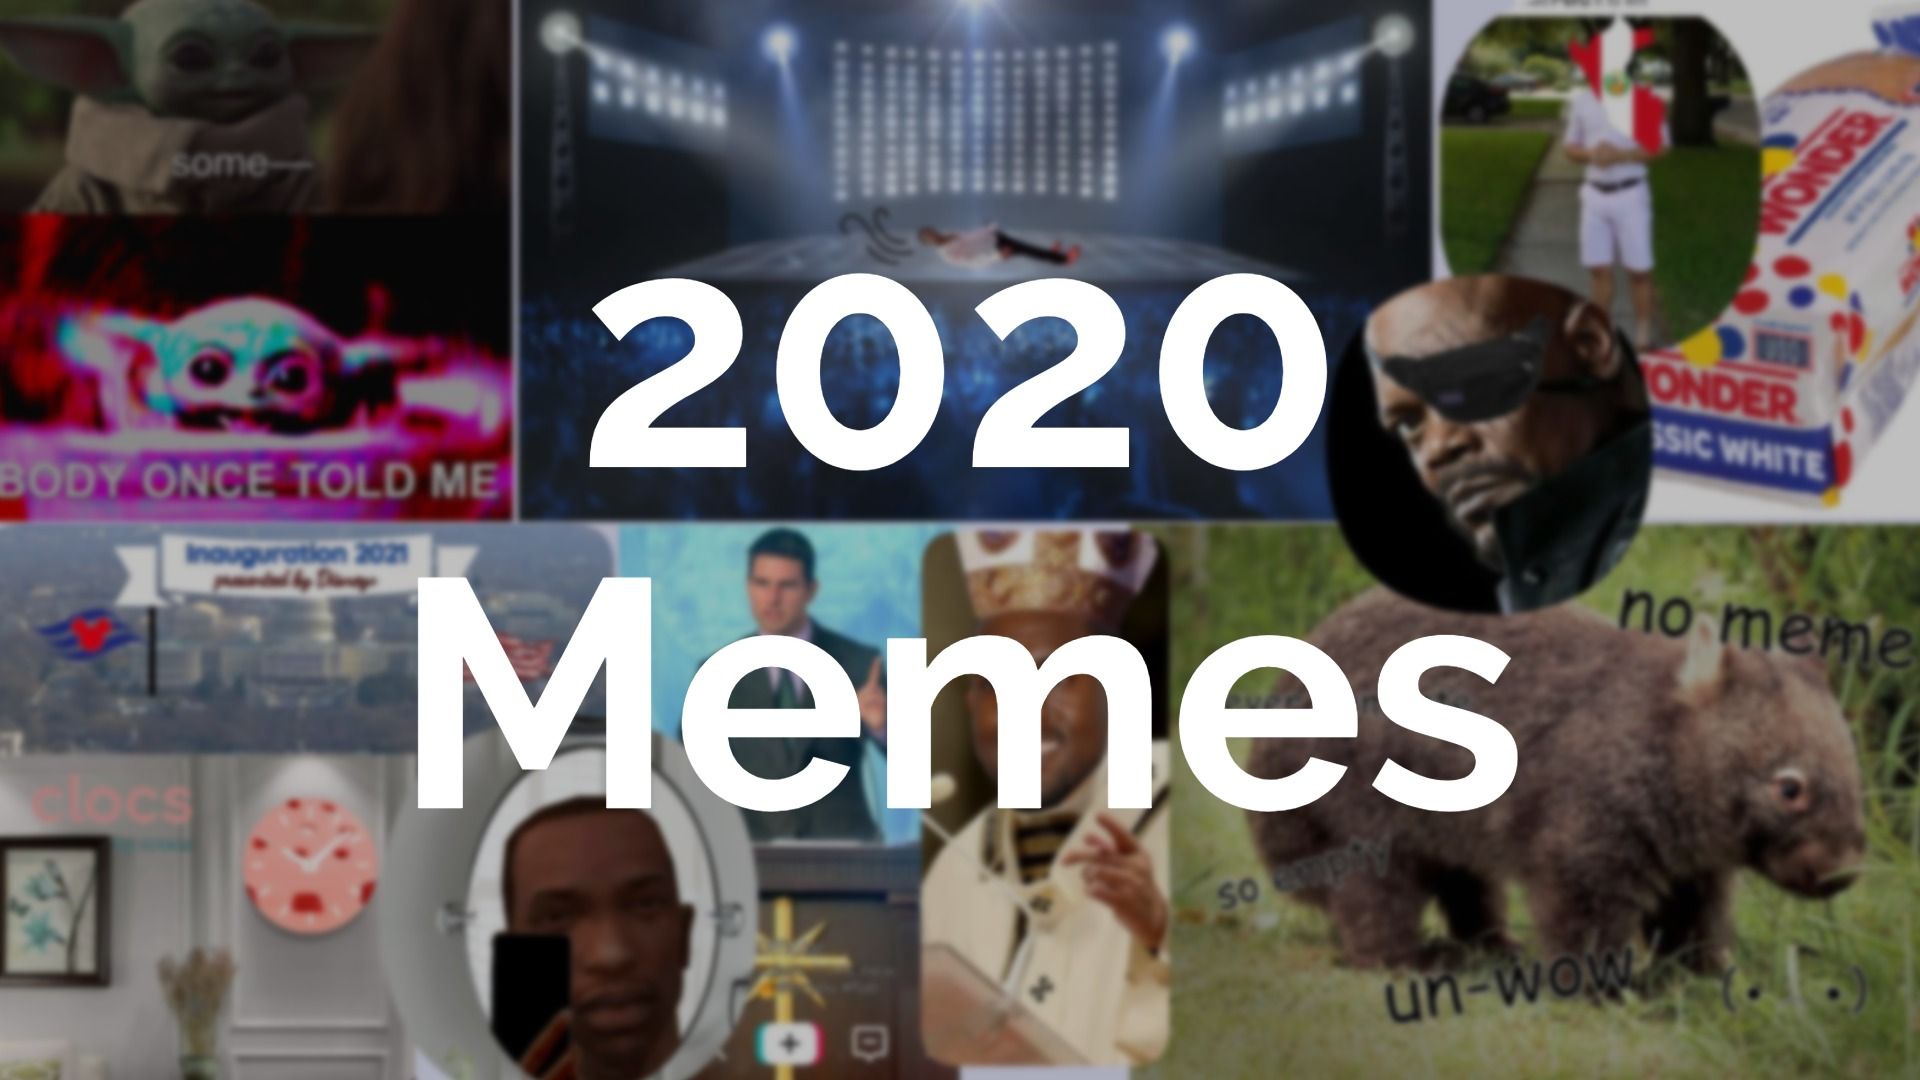 20 Memes We Re Looking Forward To In 2020 With Templates